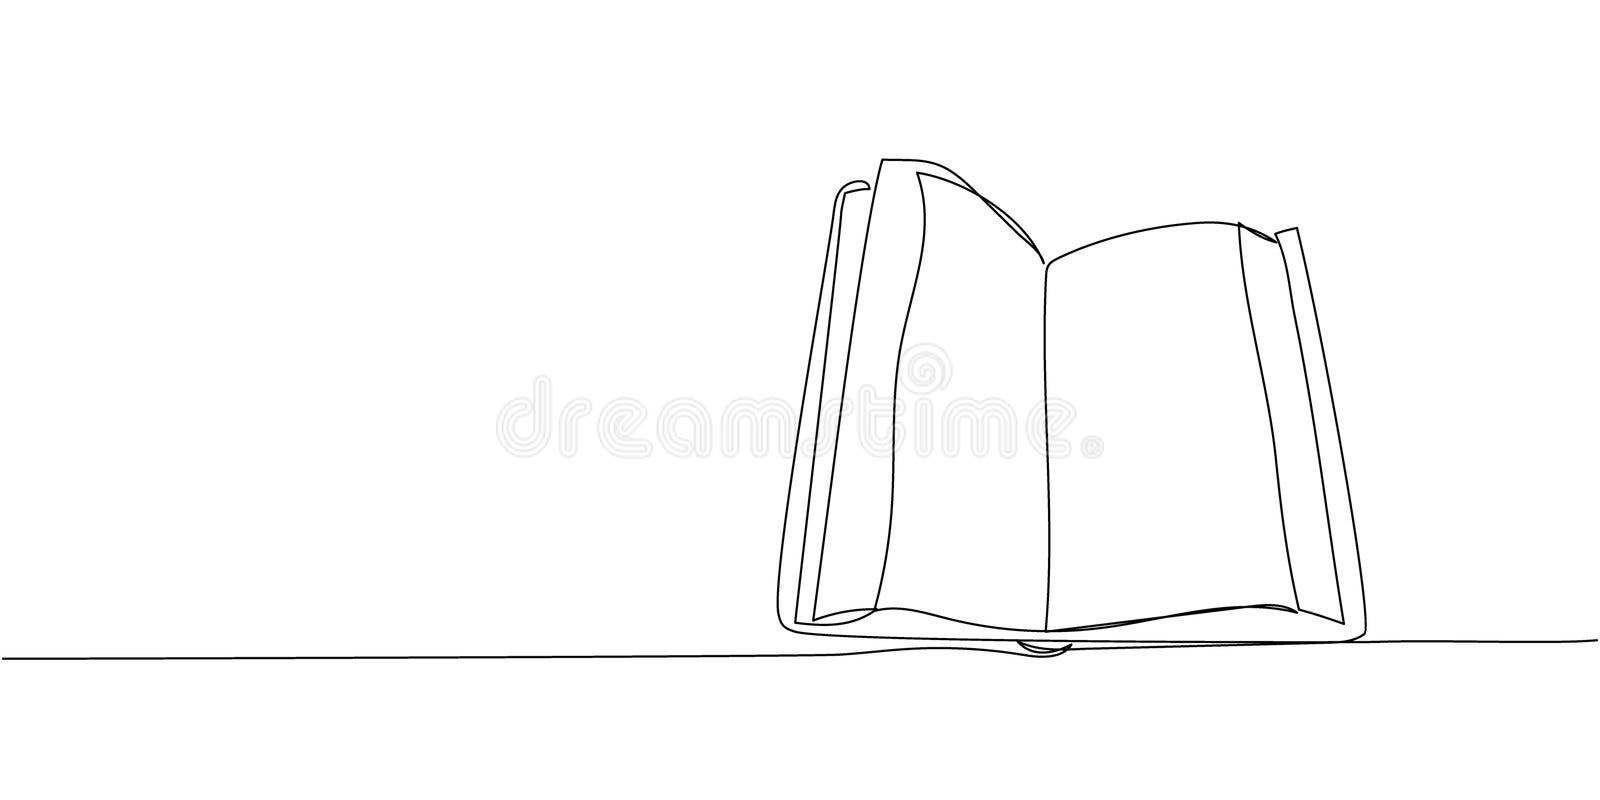 The Open Book” outline drawing - Inky Paper House's Ko-fi Shop